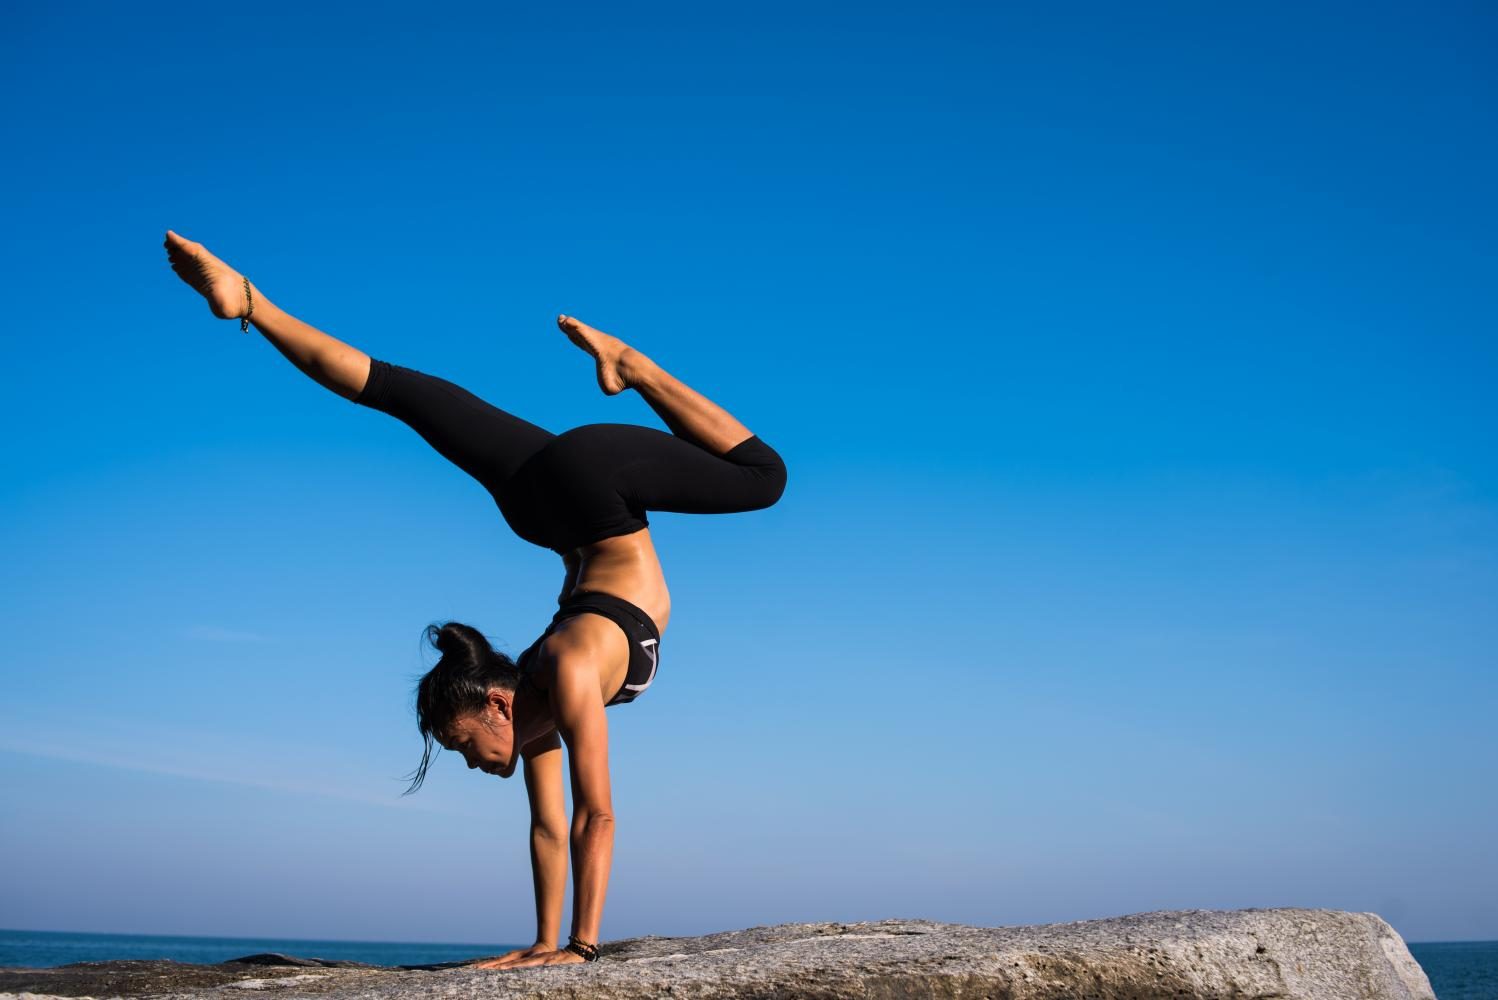 Some benefits of yoga include increased flexibility and muscle tone.